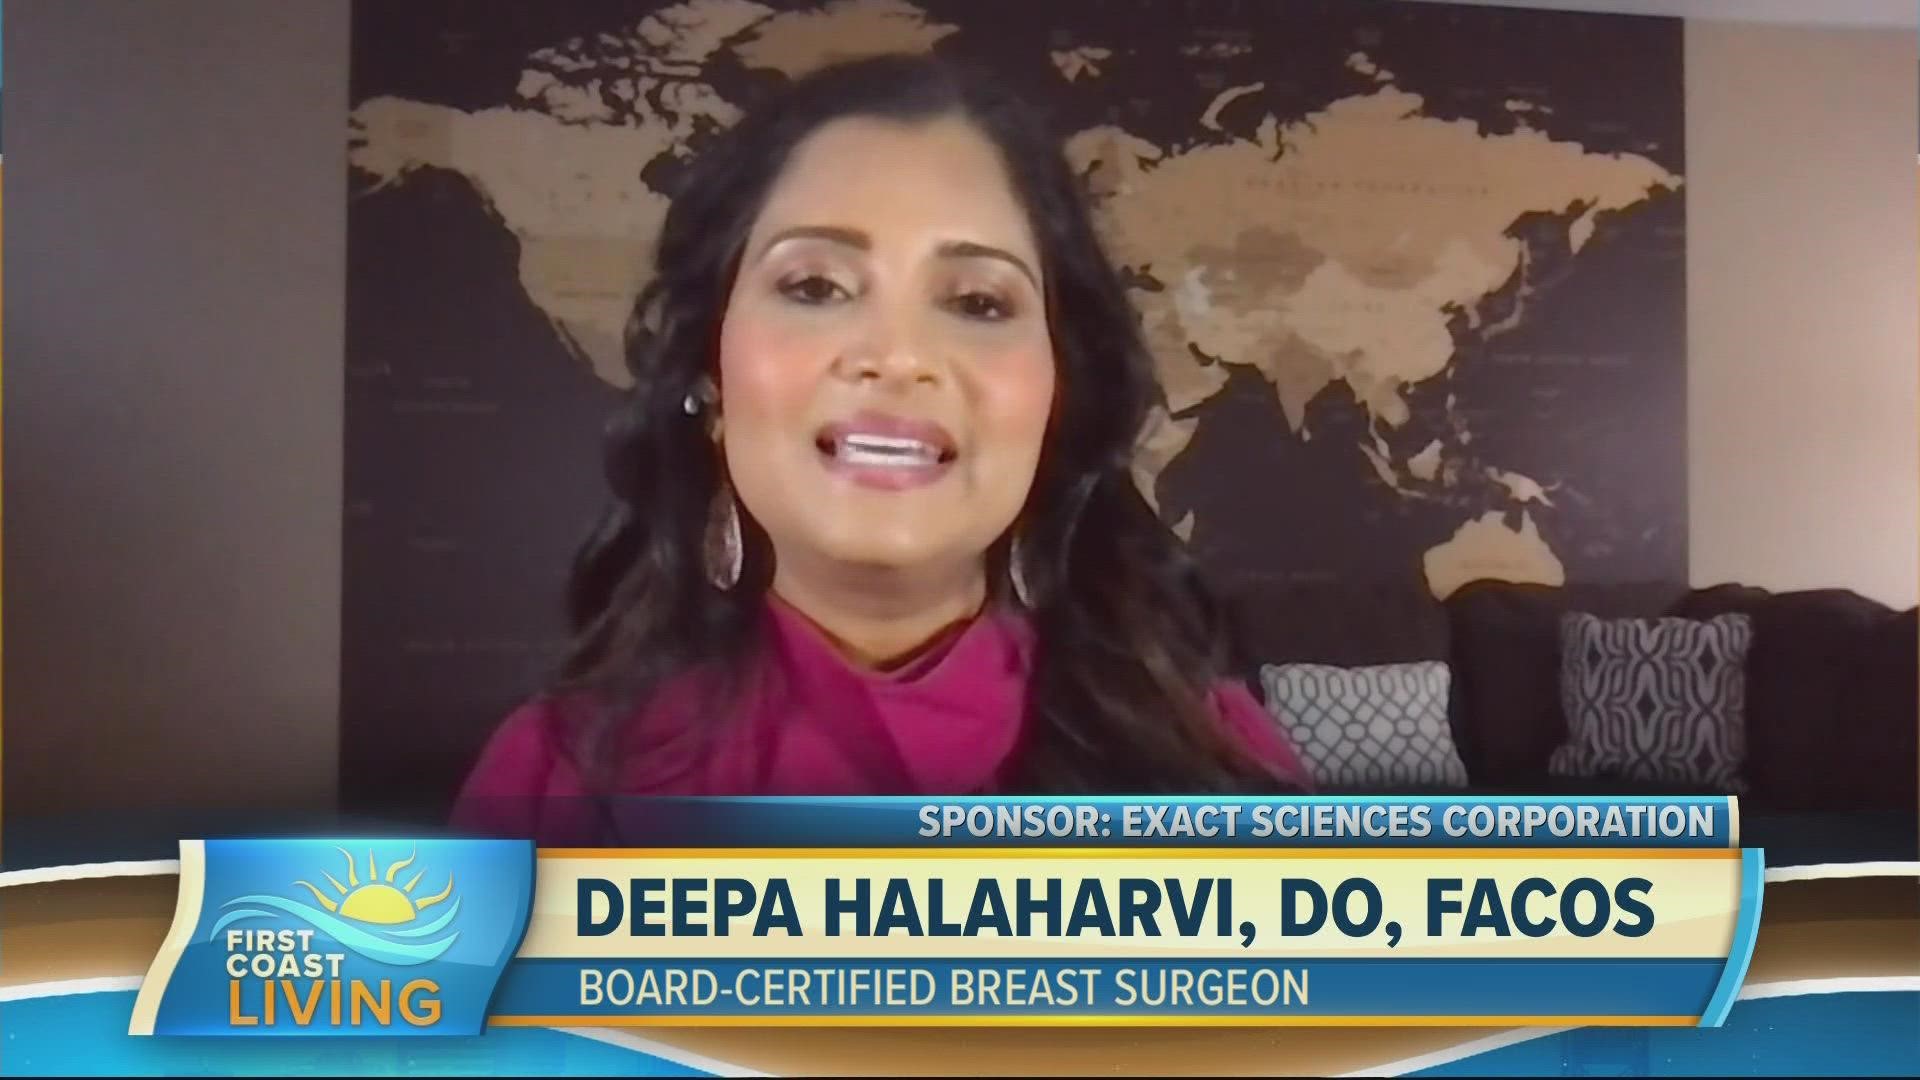 Dr. Deepa Halaharvi is a board-certified breast cancer surgeon and gives key advice on what to do if you or a loved one is faced with a treatment decision.